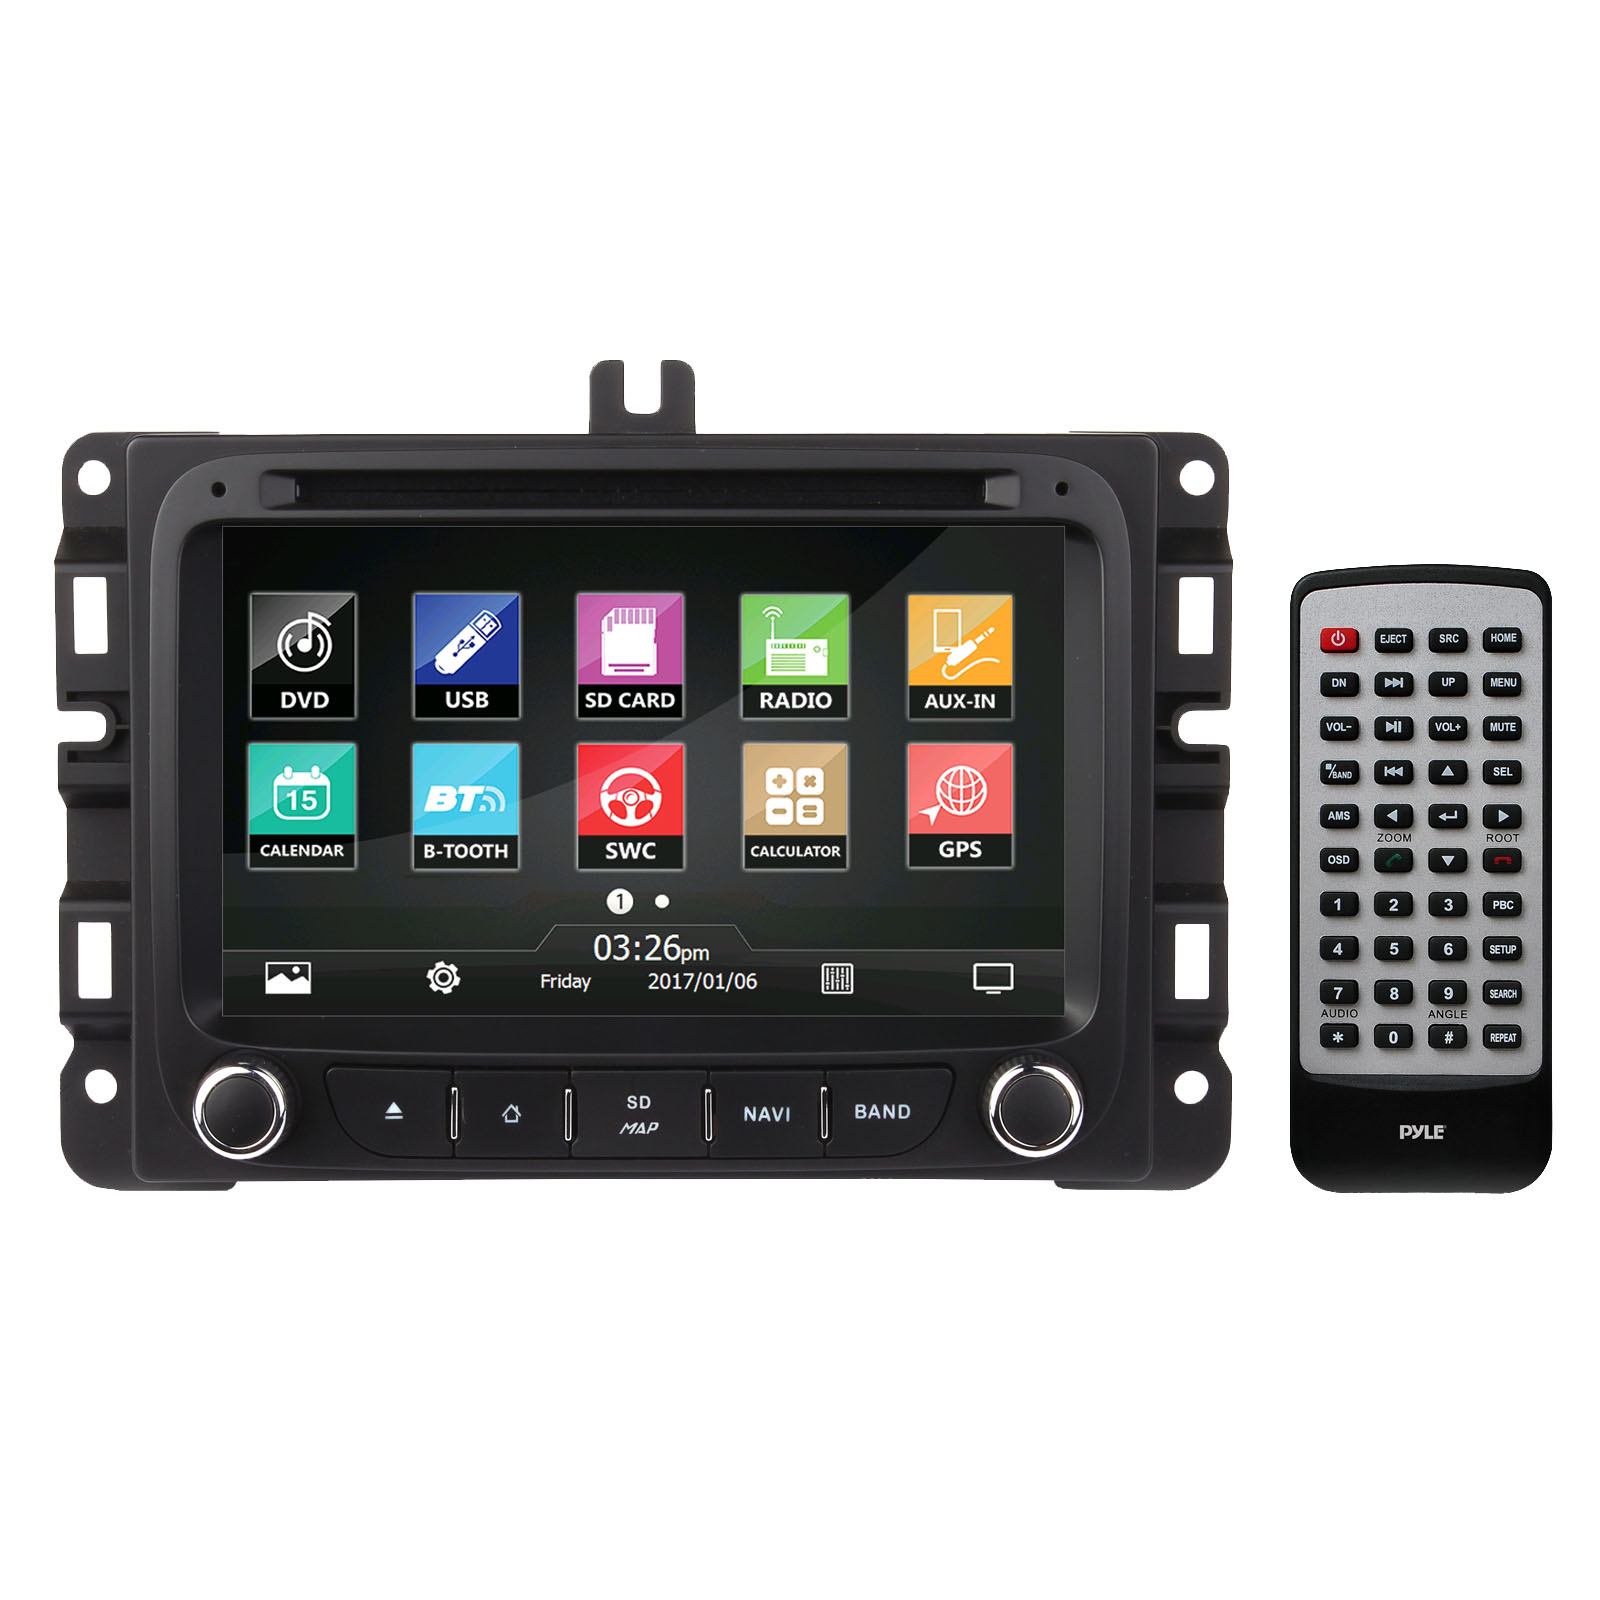 PYLE PJEEPREN16 - Jeep Renegade HeadUnit Car Stereo - Receiver System 2015/2016, Bluetooth Wireless, CD/DVD Player, 7'' HD Touchscreen Display, AM/FM Radio, Single DIN - image 1 of 5